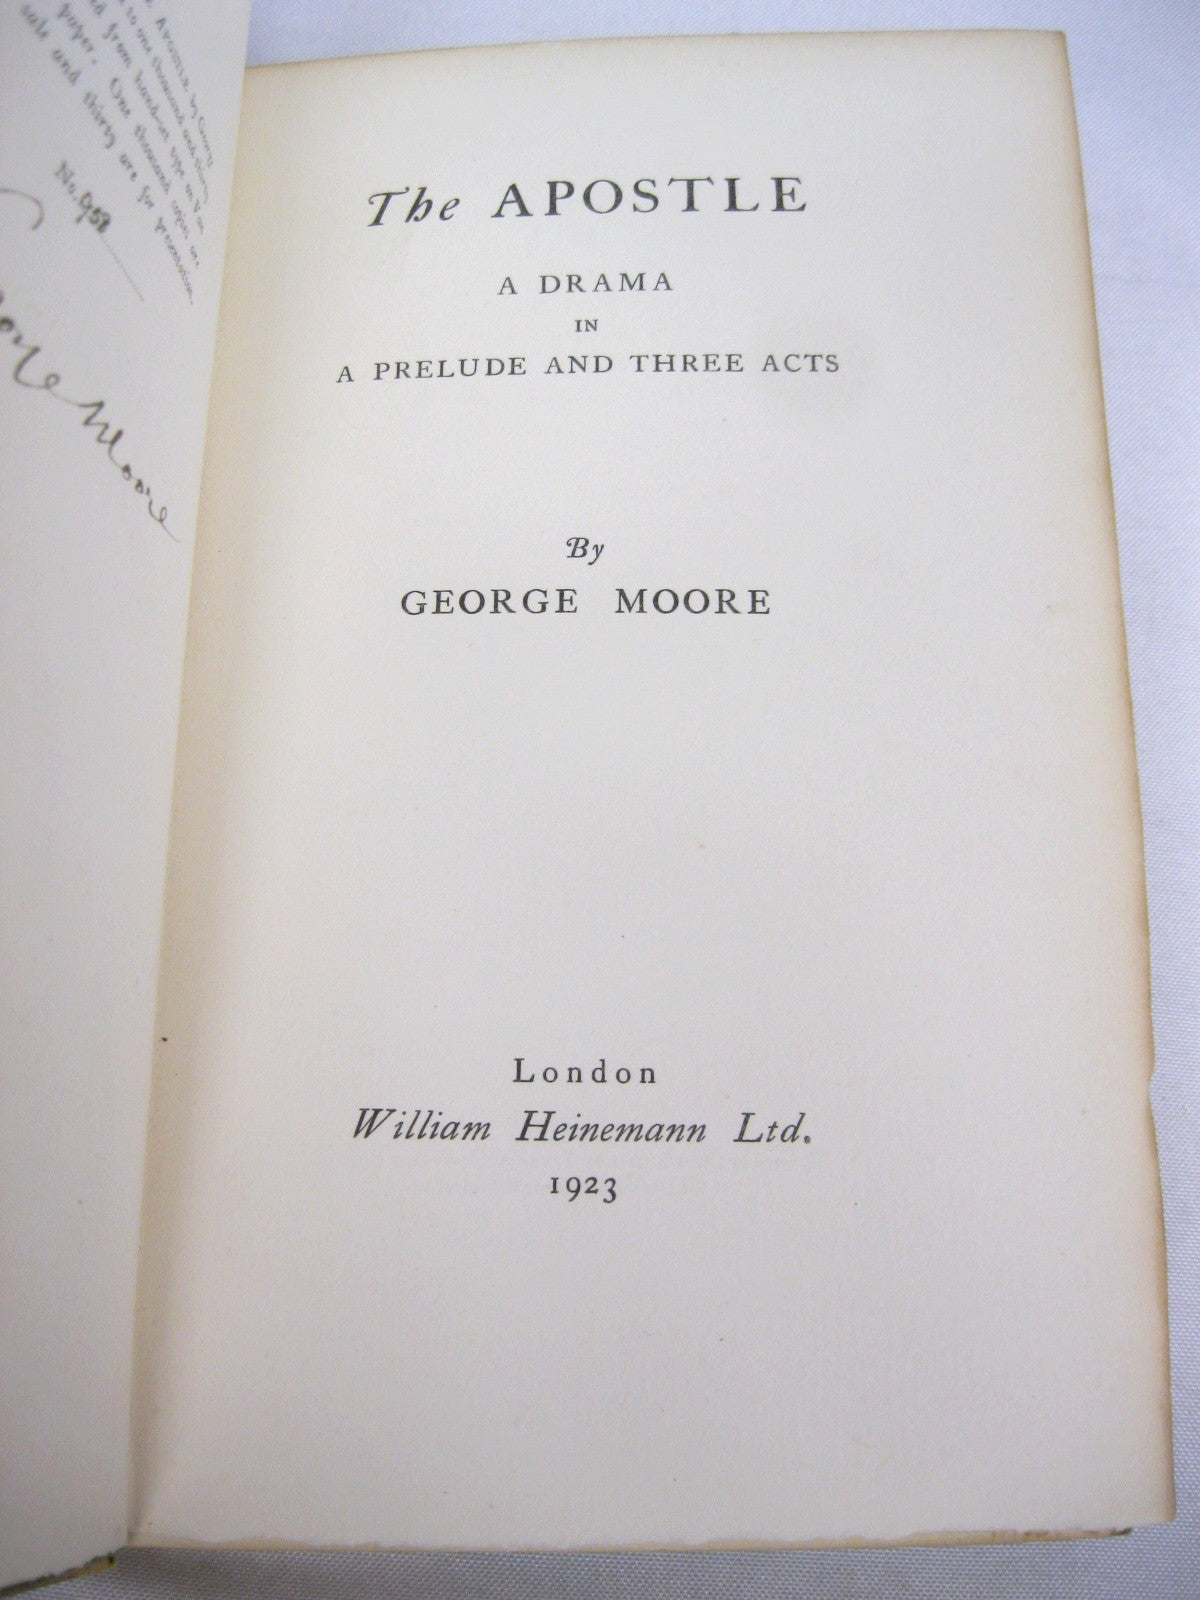 The Apostle, a Drama by George Moore